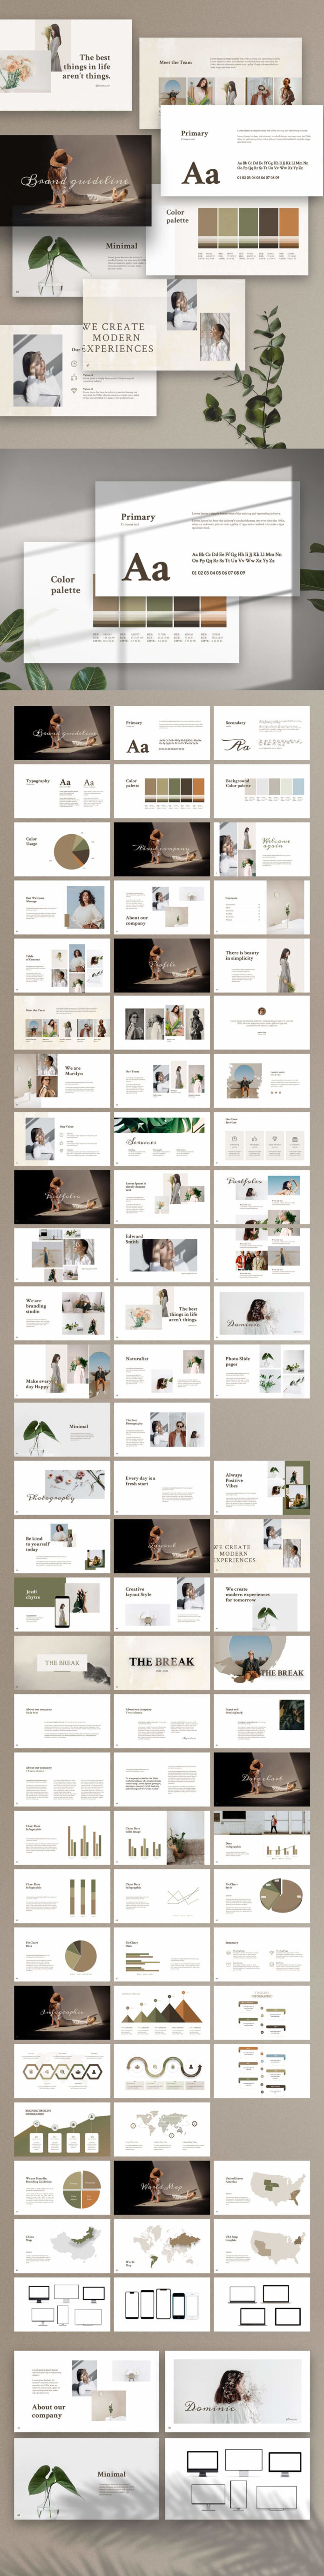 Merylin Brand Guidelines Powerpoint Template - Free Download